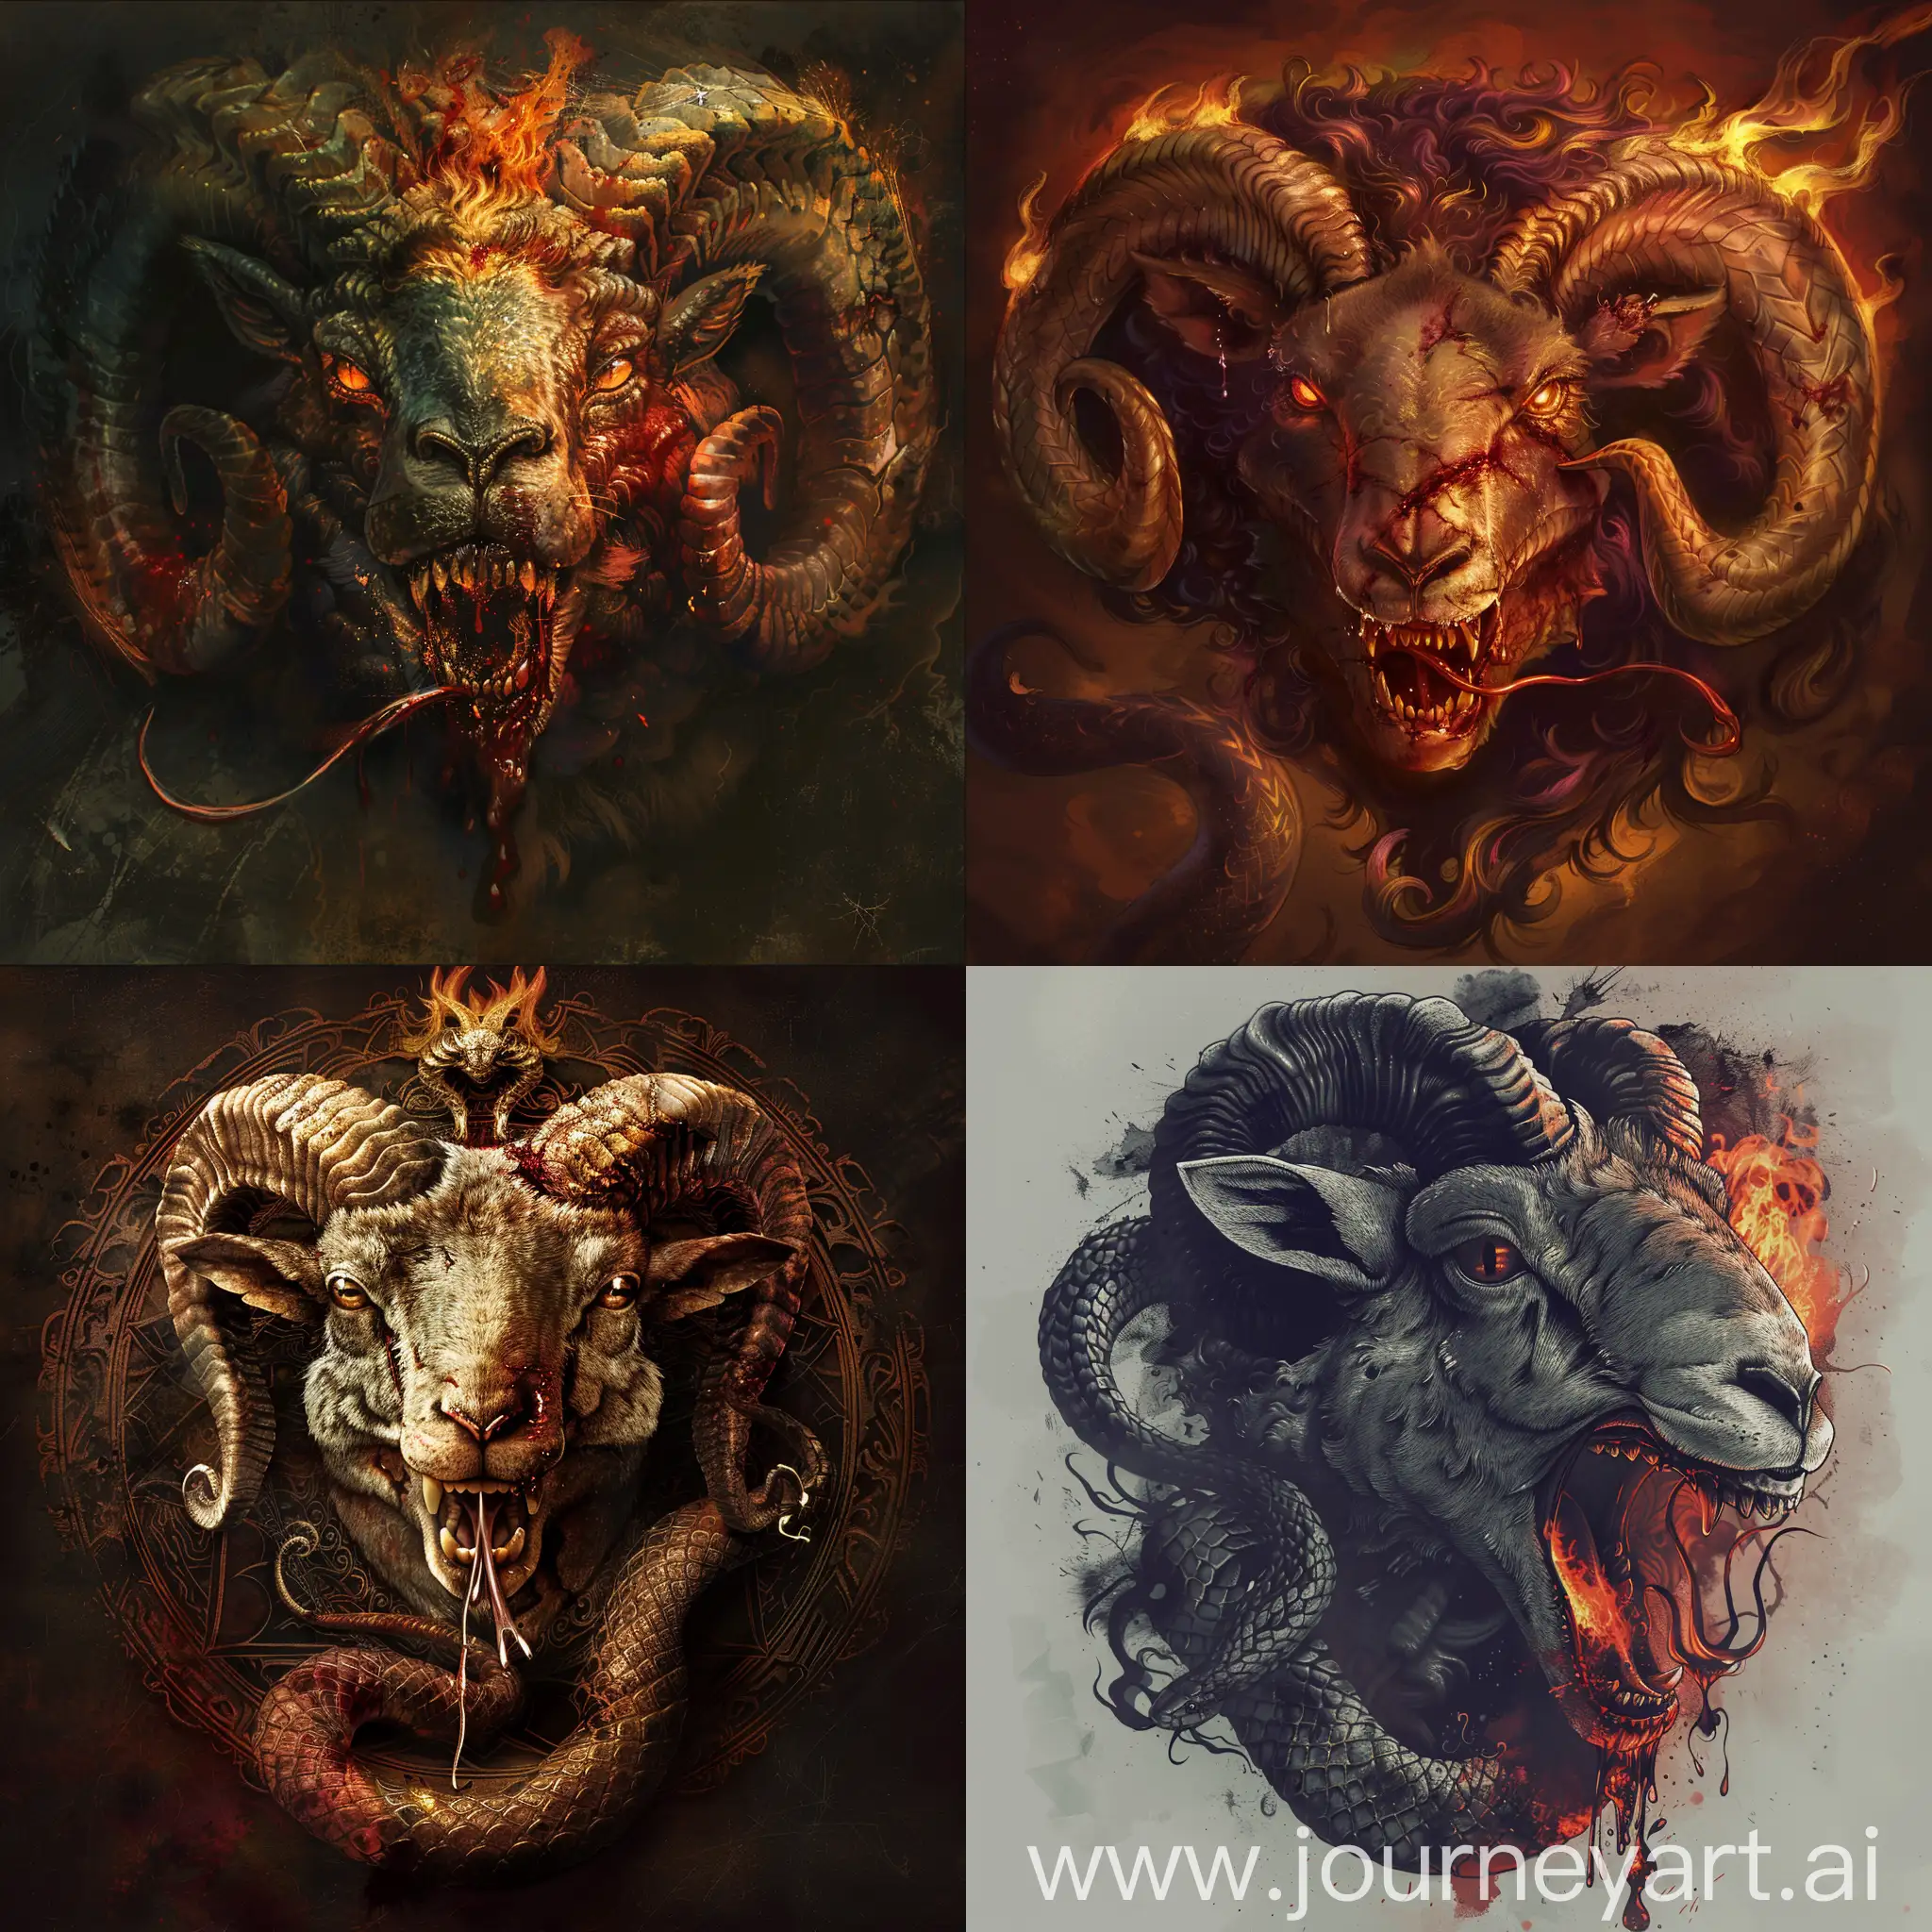 Fiery-Aries-Confronts-Bloodthirsty-Snake-Mythical-Clash-of-Fury